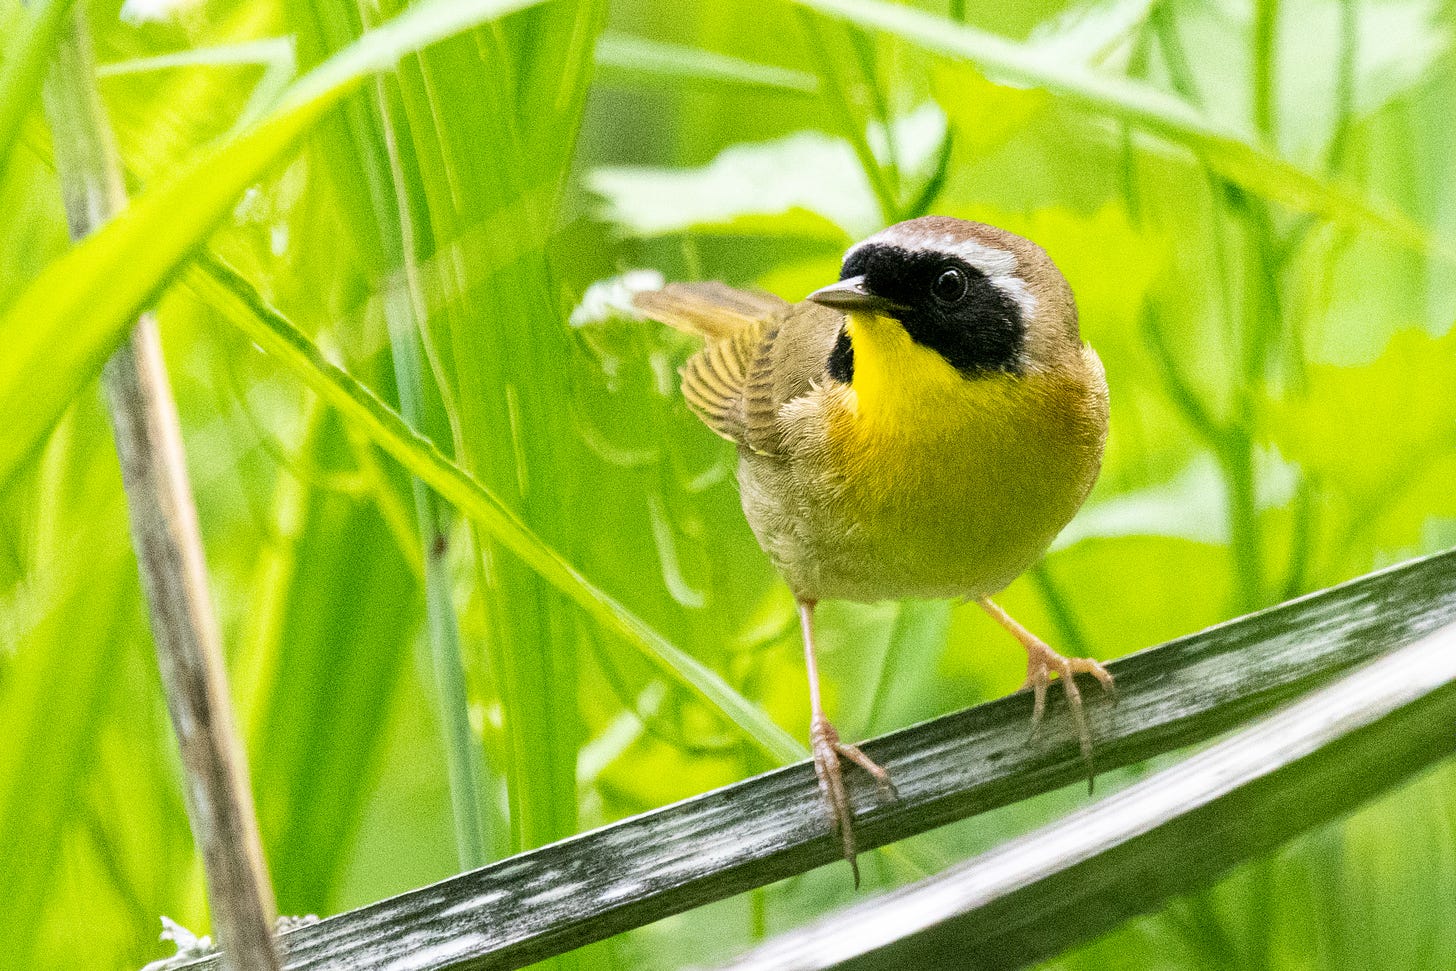 A common yellowthroat perched on a dry stem, looking to one side